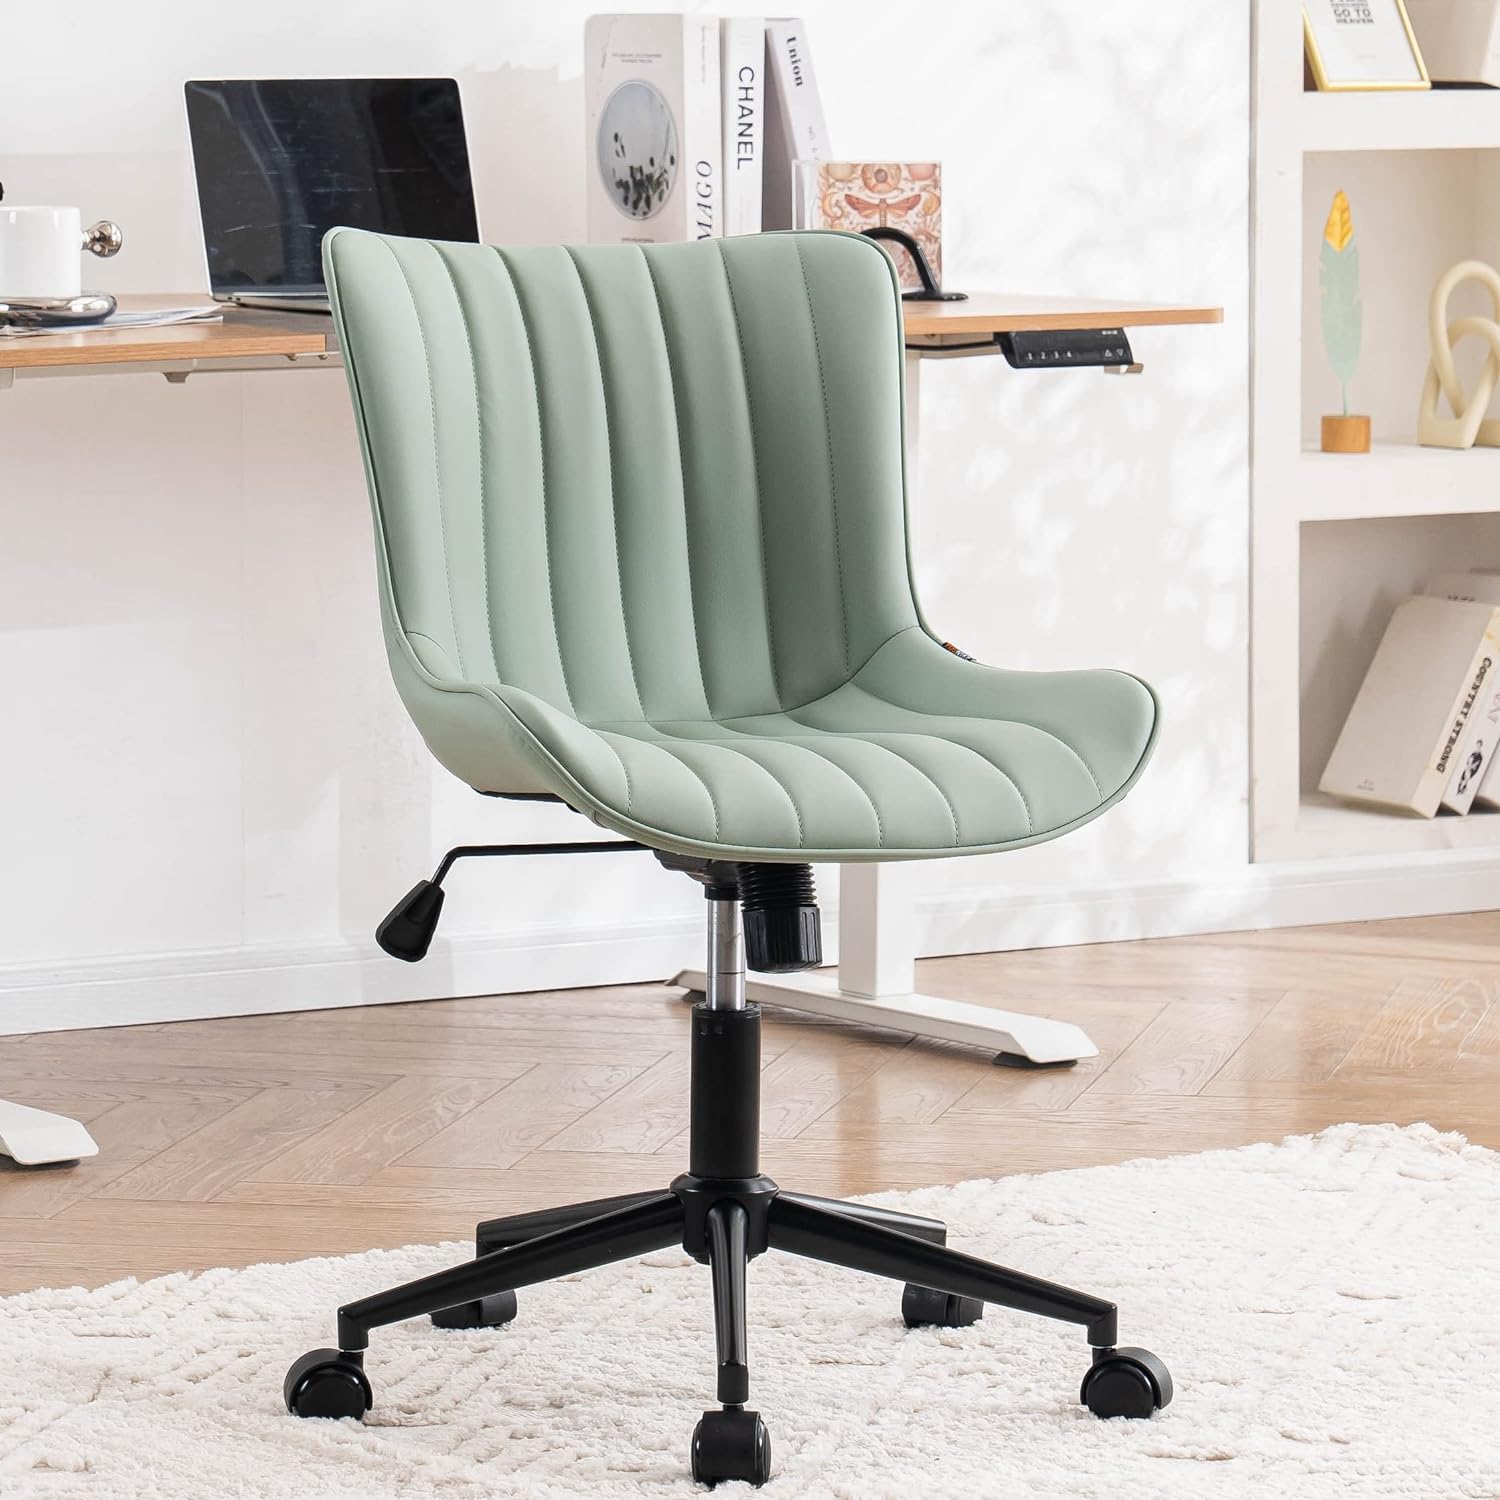 Channel Tufted Small Desk Chair